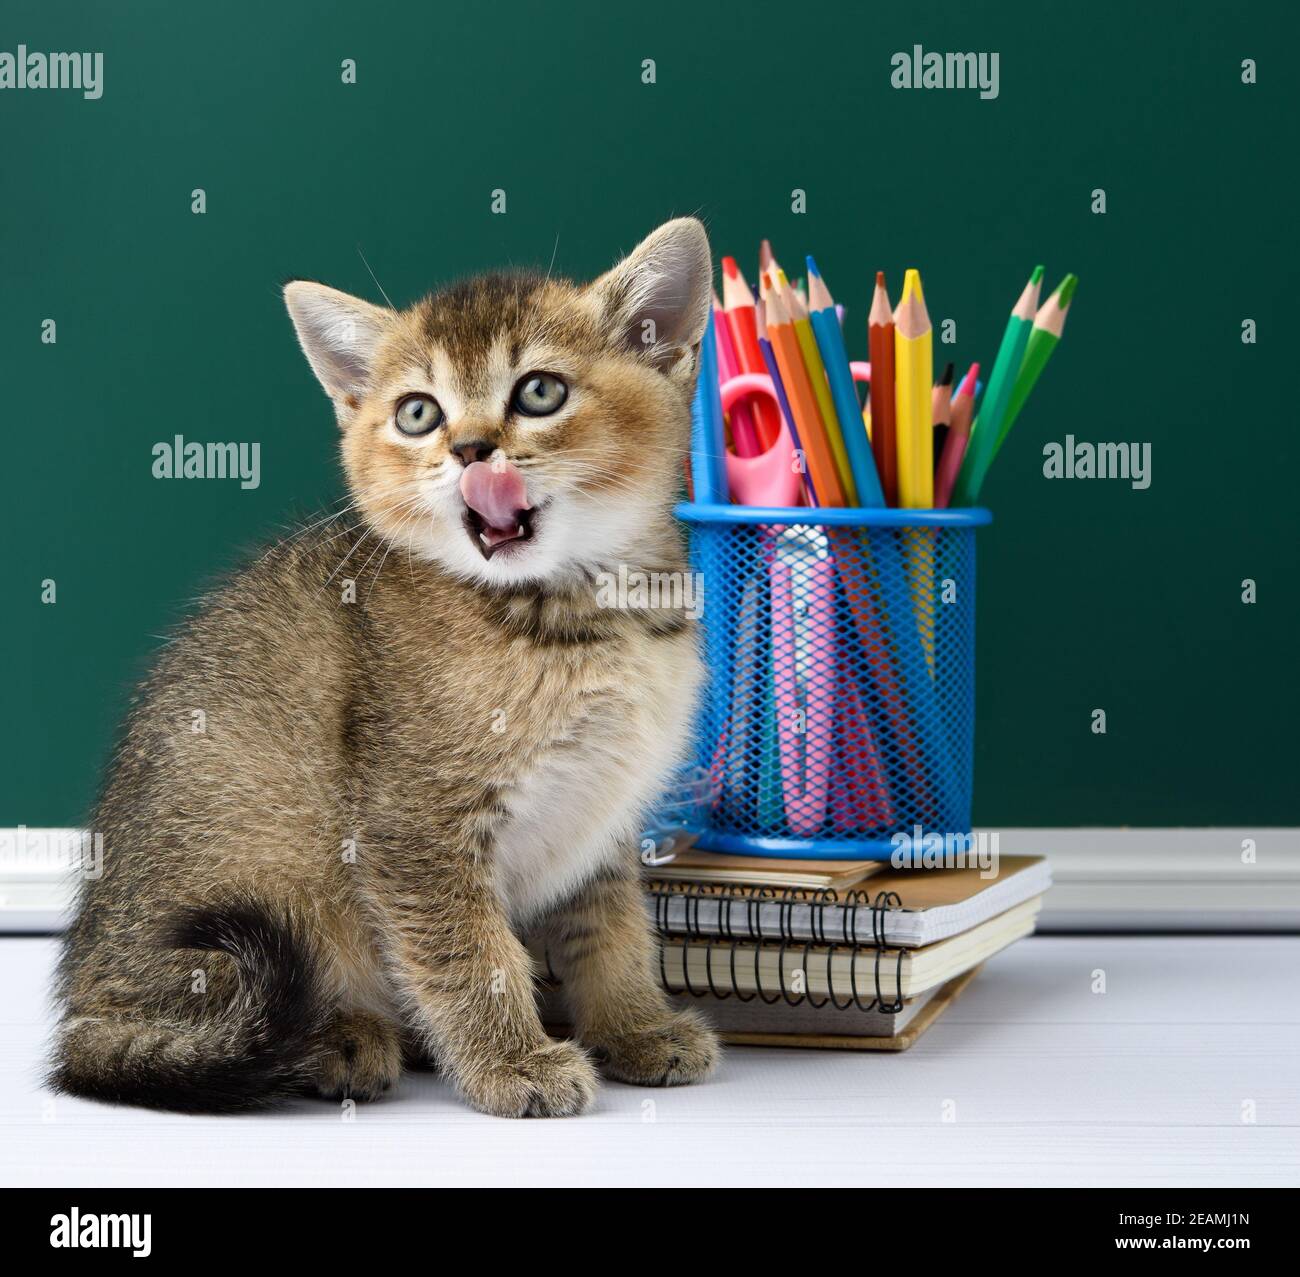 cute kitten scottish golden chinchilla straight sitting on a yellow book on a background of green chalk board and stationery Stock Photo